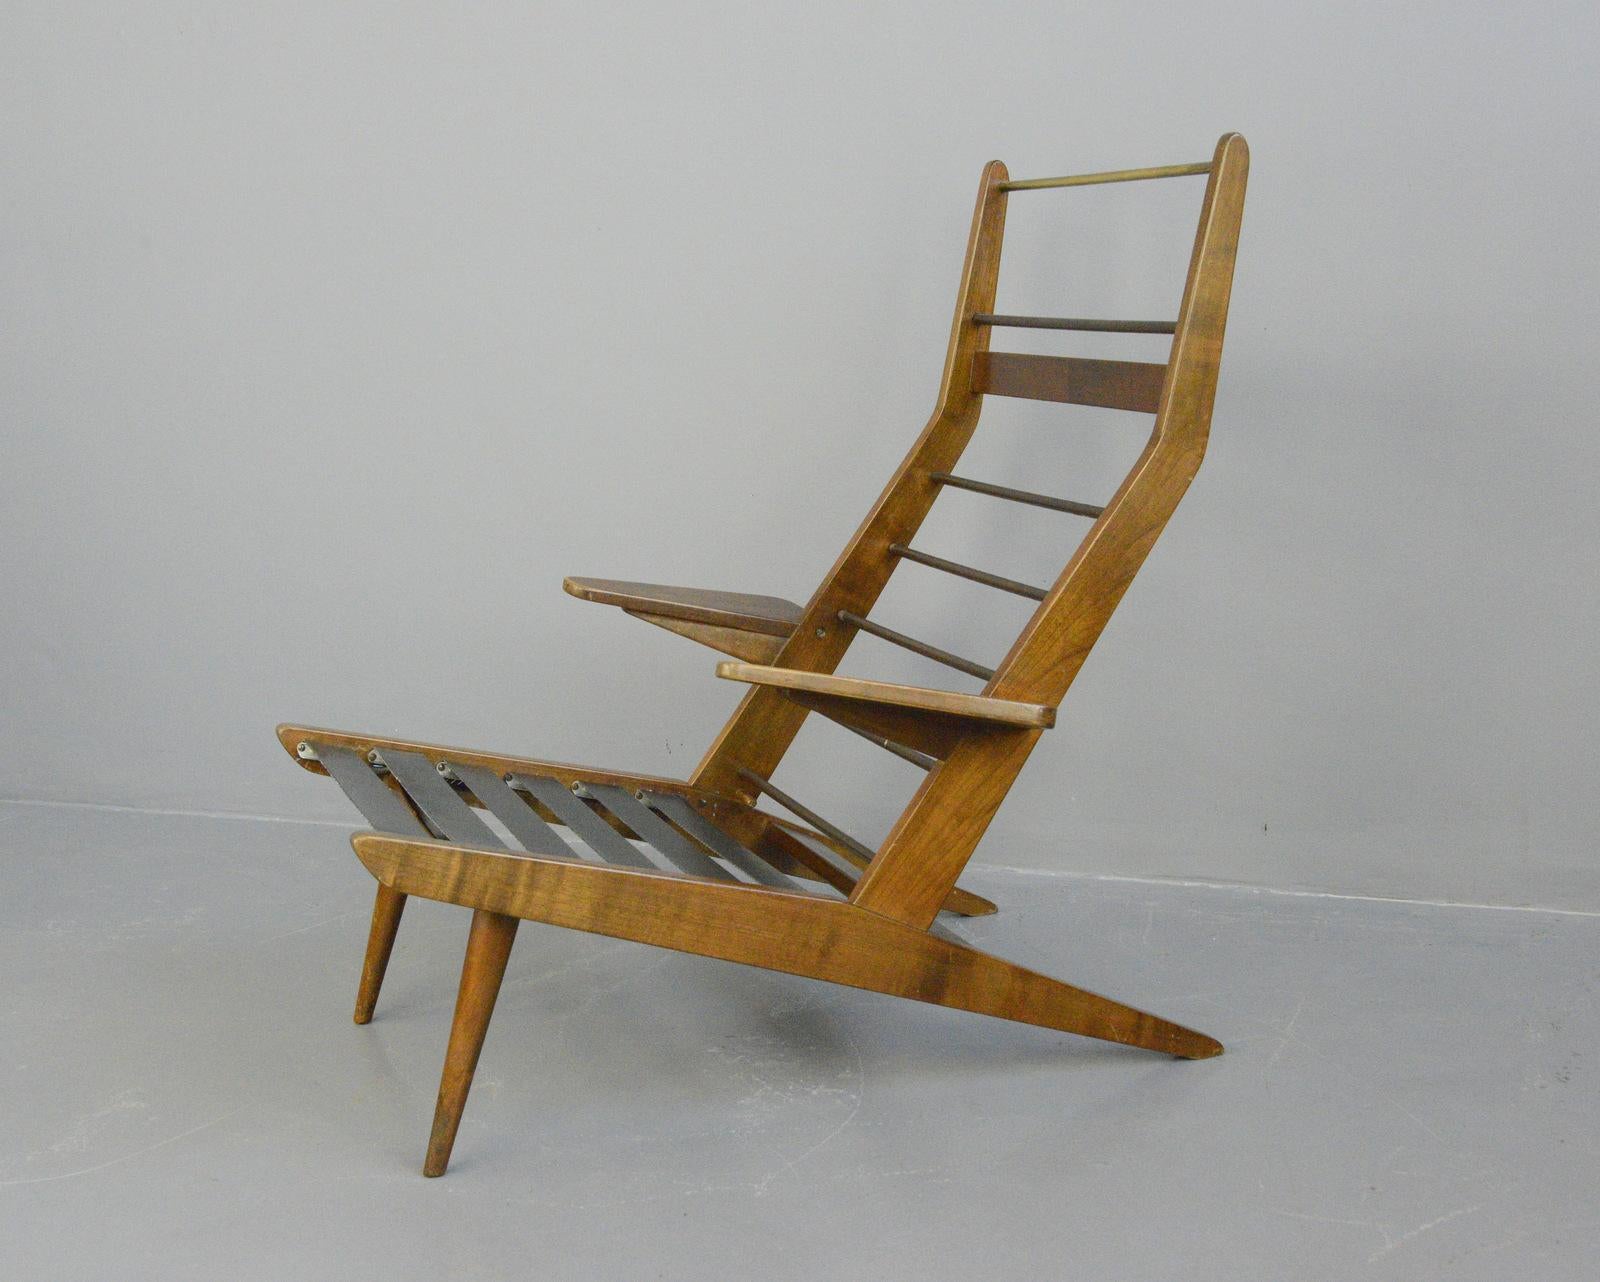 Lounge chair by Rob Parry for Gelderland, circa 1950s

 Sprung seat and back rest
- New upholstery
- Designed by Rob Parry
- Produced by Gelderland
- Dutch ~ 1950s
- Measures: 80cm wide x 90cm deep x 99cm tall
- 36cm seat height

Condition